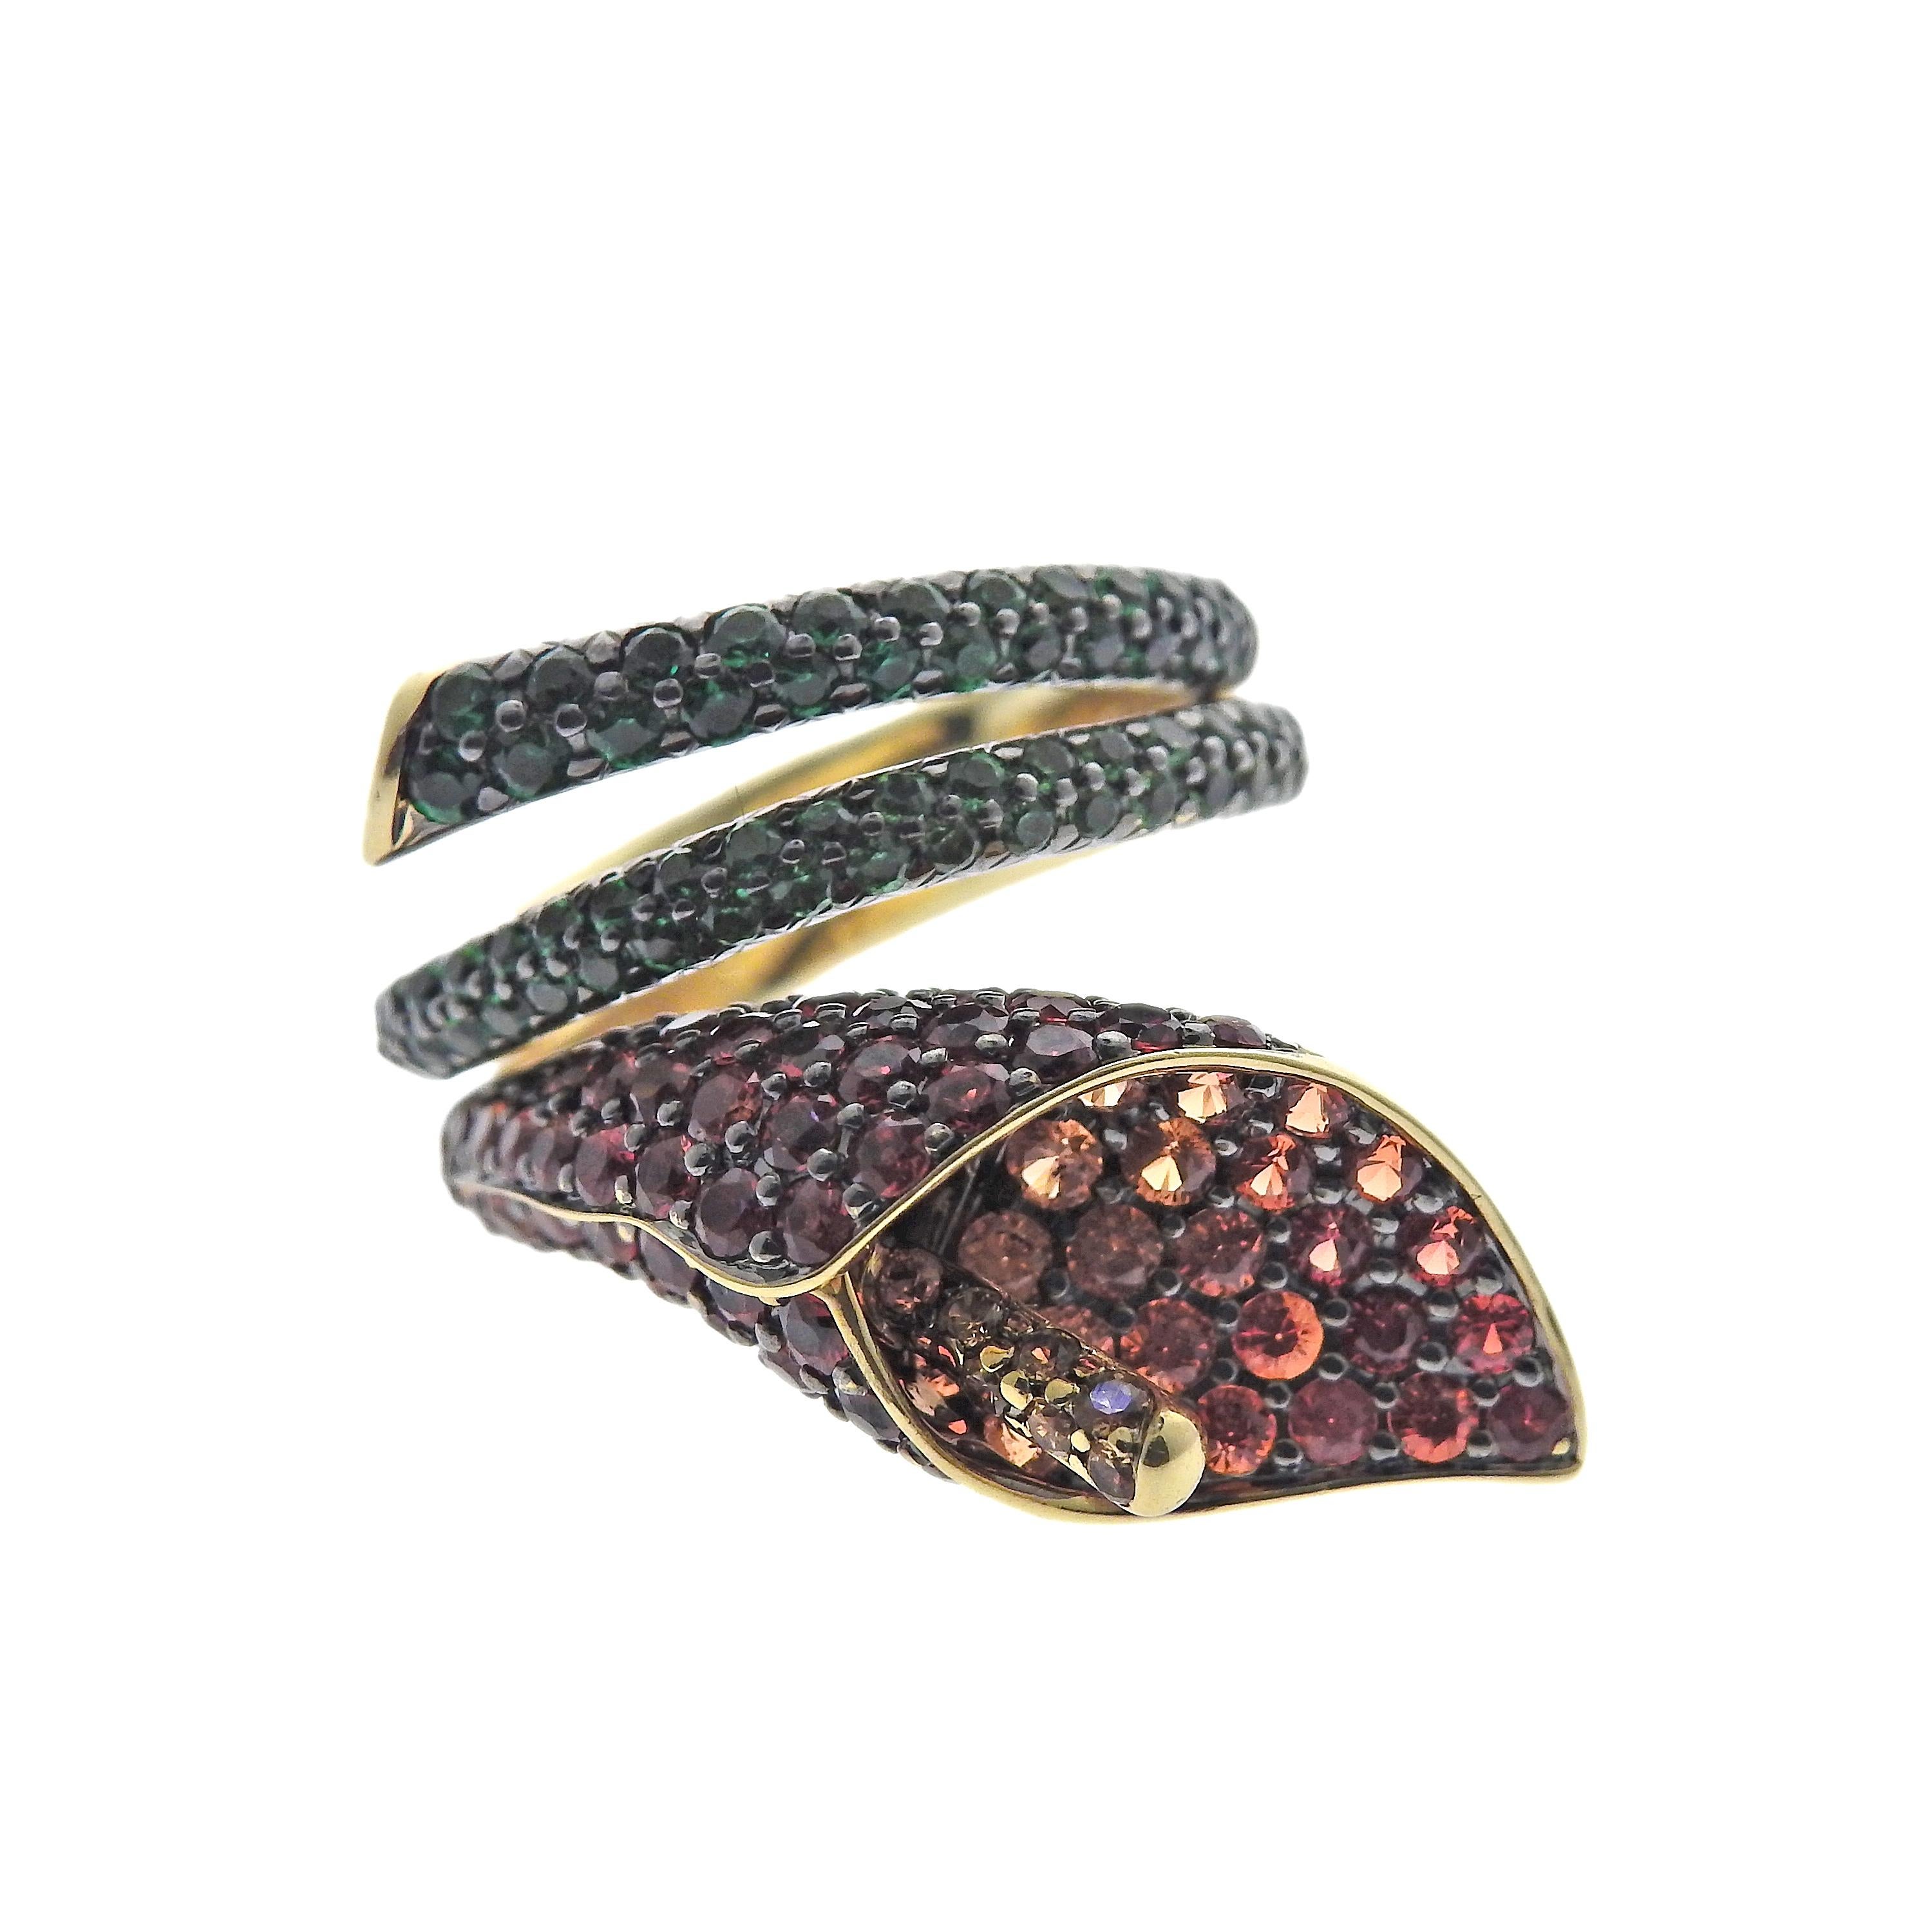 Asprey London Lily ring set in 18K yellow gold, with sapphires and tsavorites. Ring size is 5 1/2. Marked: Asprey, 750. Weight is 11.9 grams.